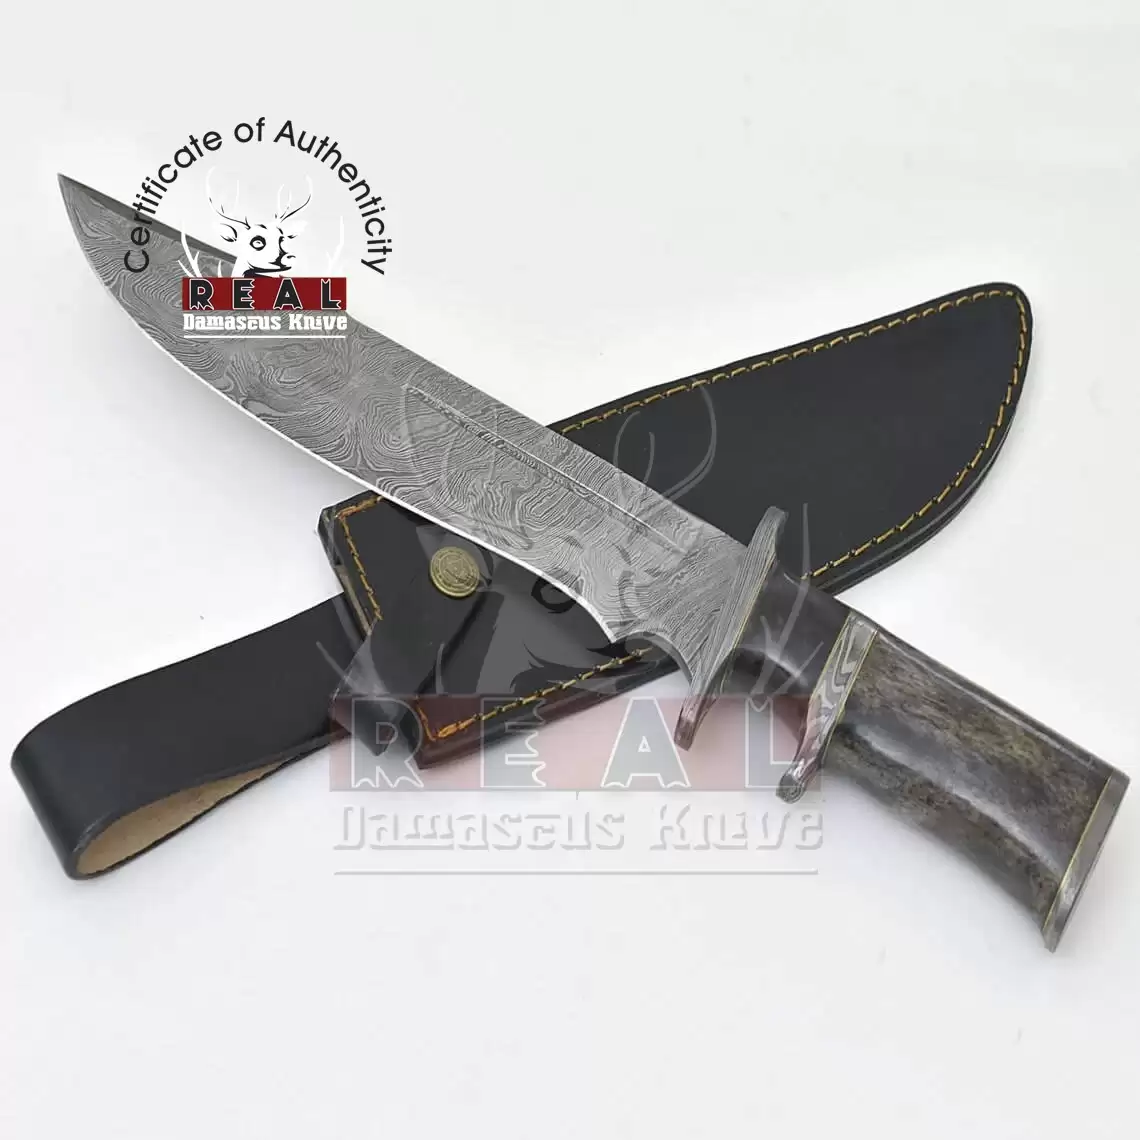 https://www.realdamascusknive.com/image/cache/cache/1001-2000/1158/main/42d8-damascus-knife-hand-made-damascus-steel-blade-knife-bowie-knife-exotic-handle-full-tang-14-5-0-1-1140x1140.webp